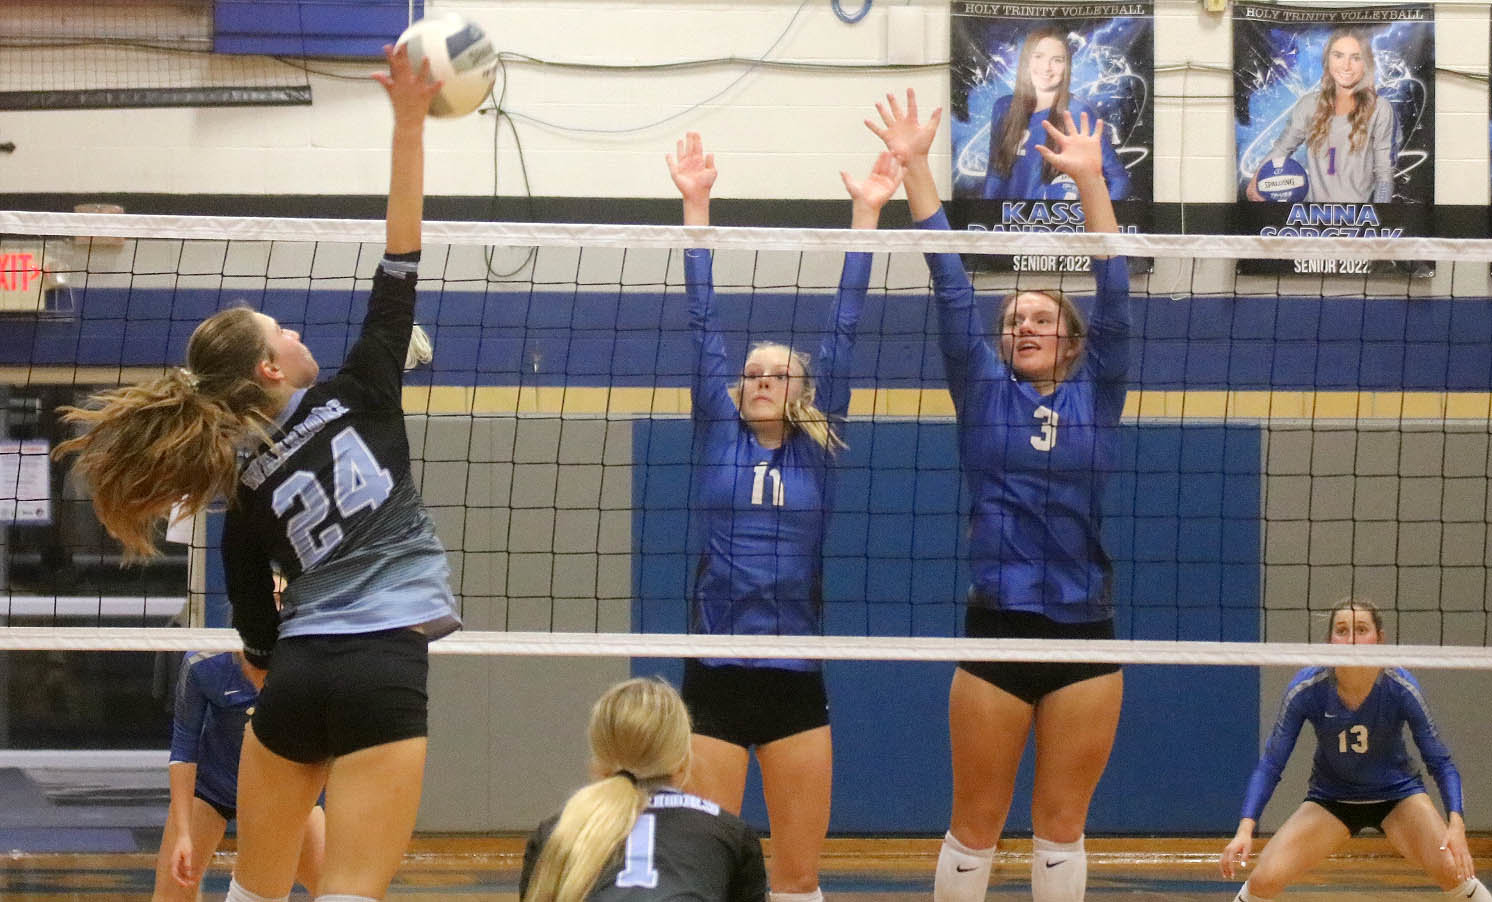 Natalie Randolph (11) and Kayla Box (3) put up a block on WACO's Marie Farmer in the third set Thursday night. The Crusaders won 4-1 to move to 18-4 on the year. Photo by Chuck Vandenberg/PCC